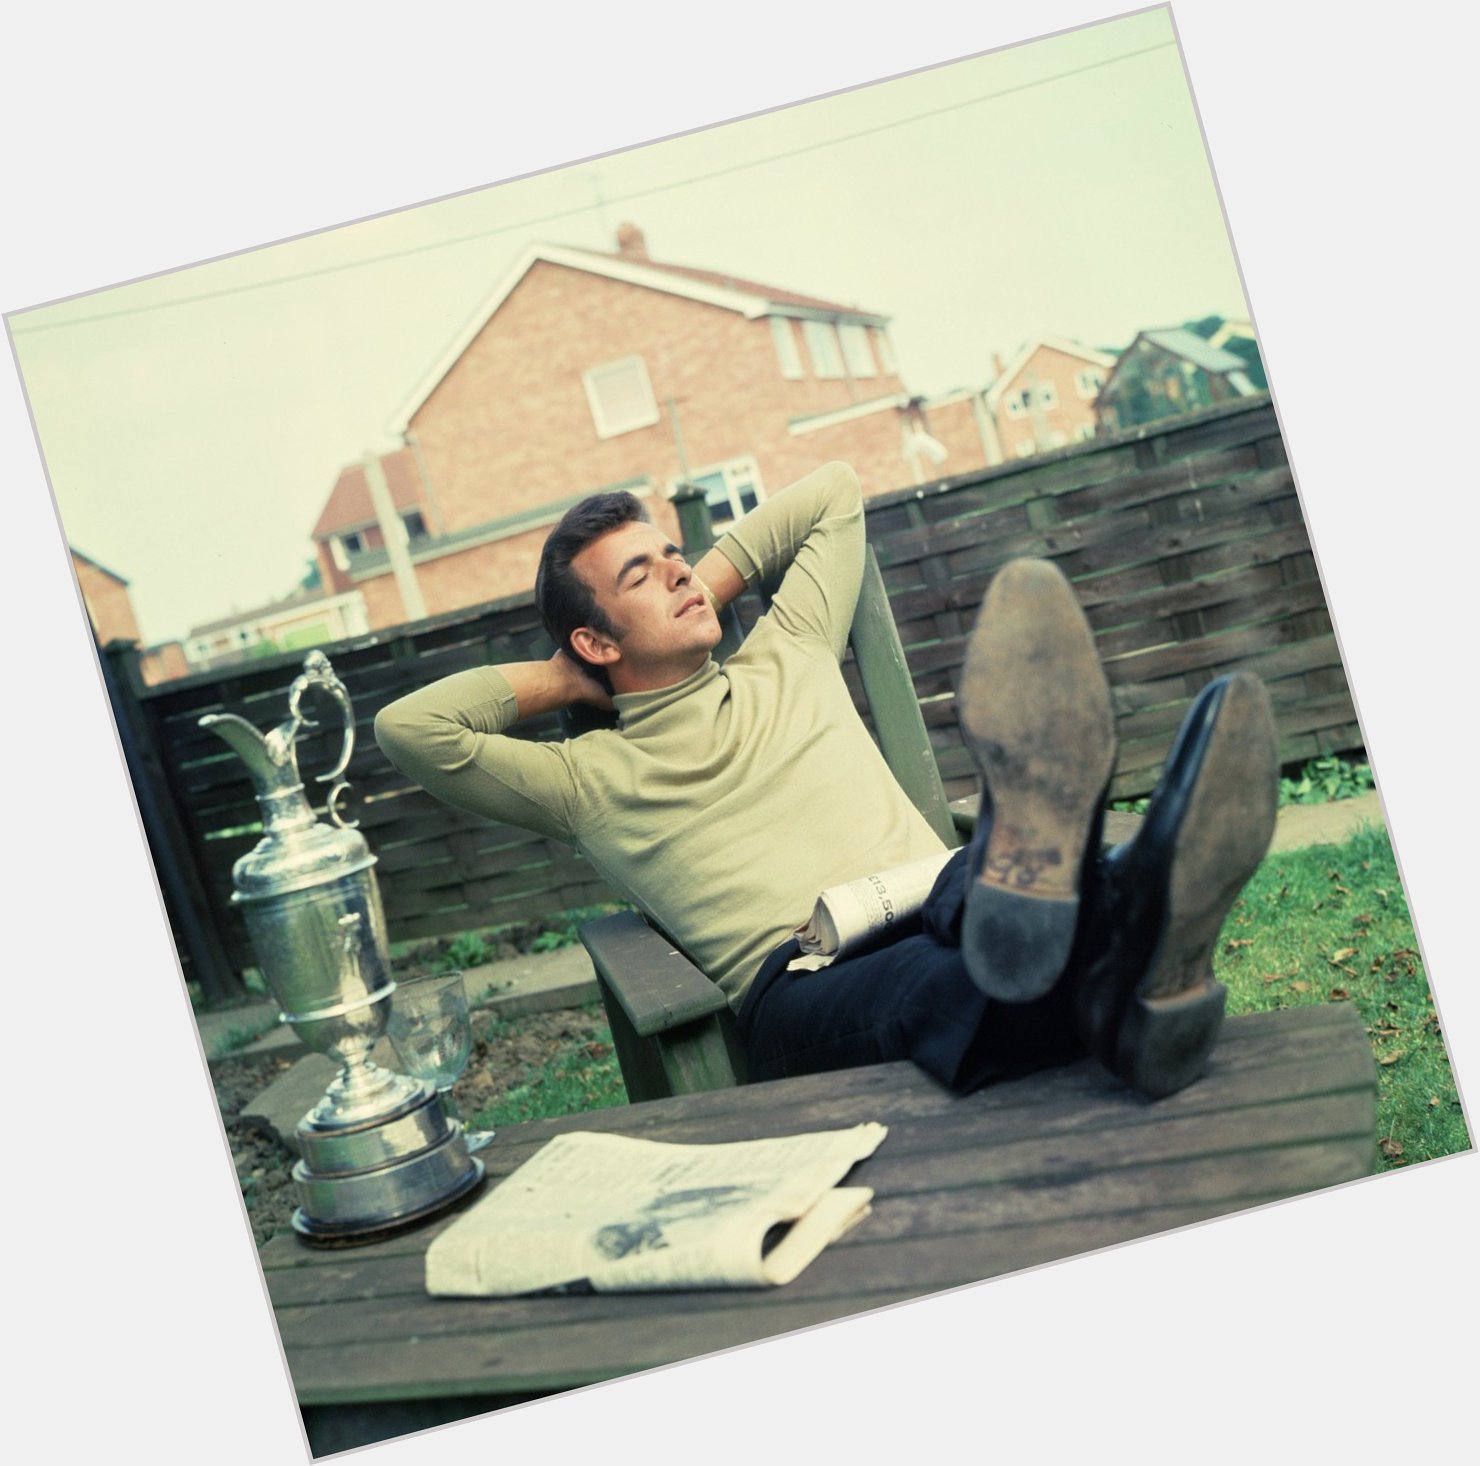 Happy Birthday, Tony Jacklin! Put your feet up, relax and have a great day 